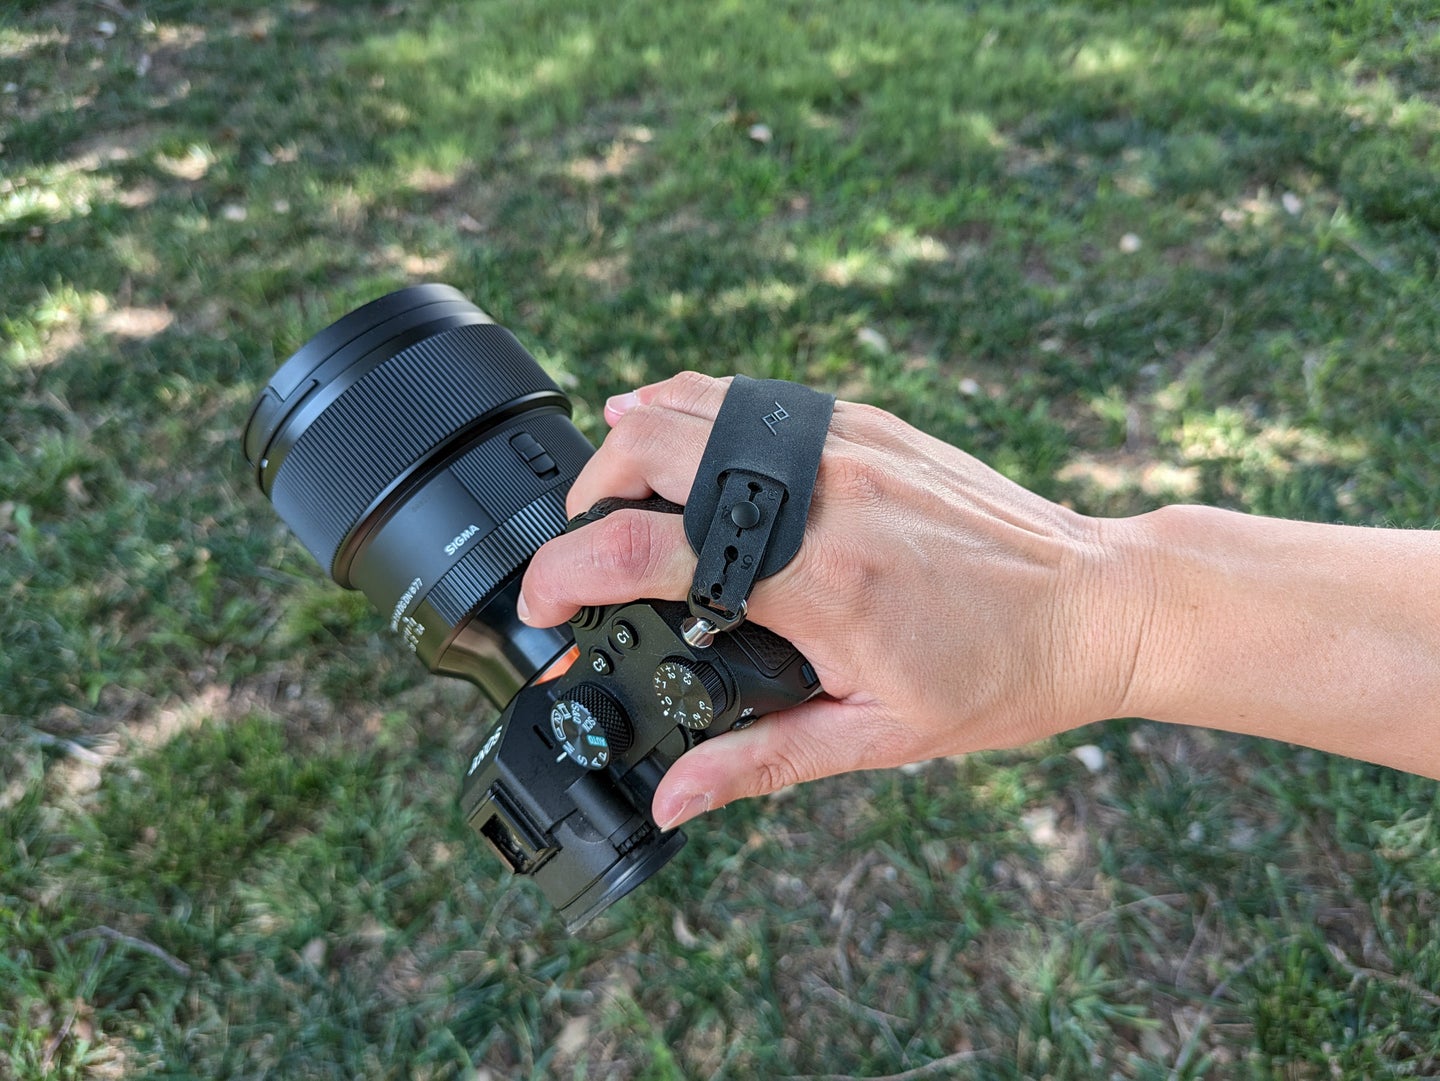 Peak Design Micro Clutch in a hand with the Sony a7 III camera